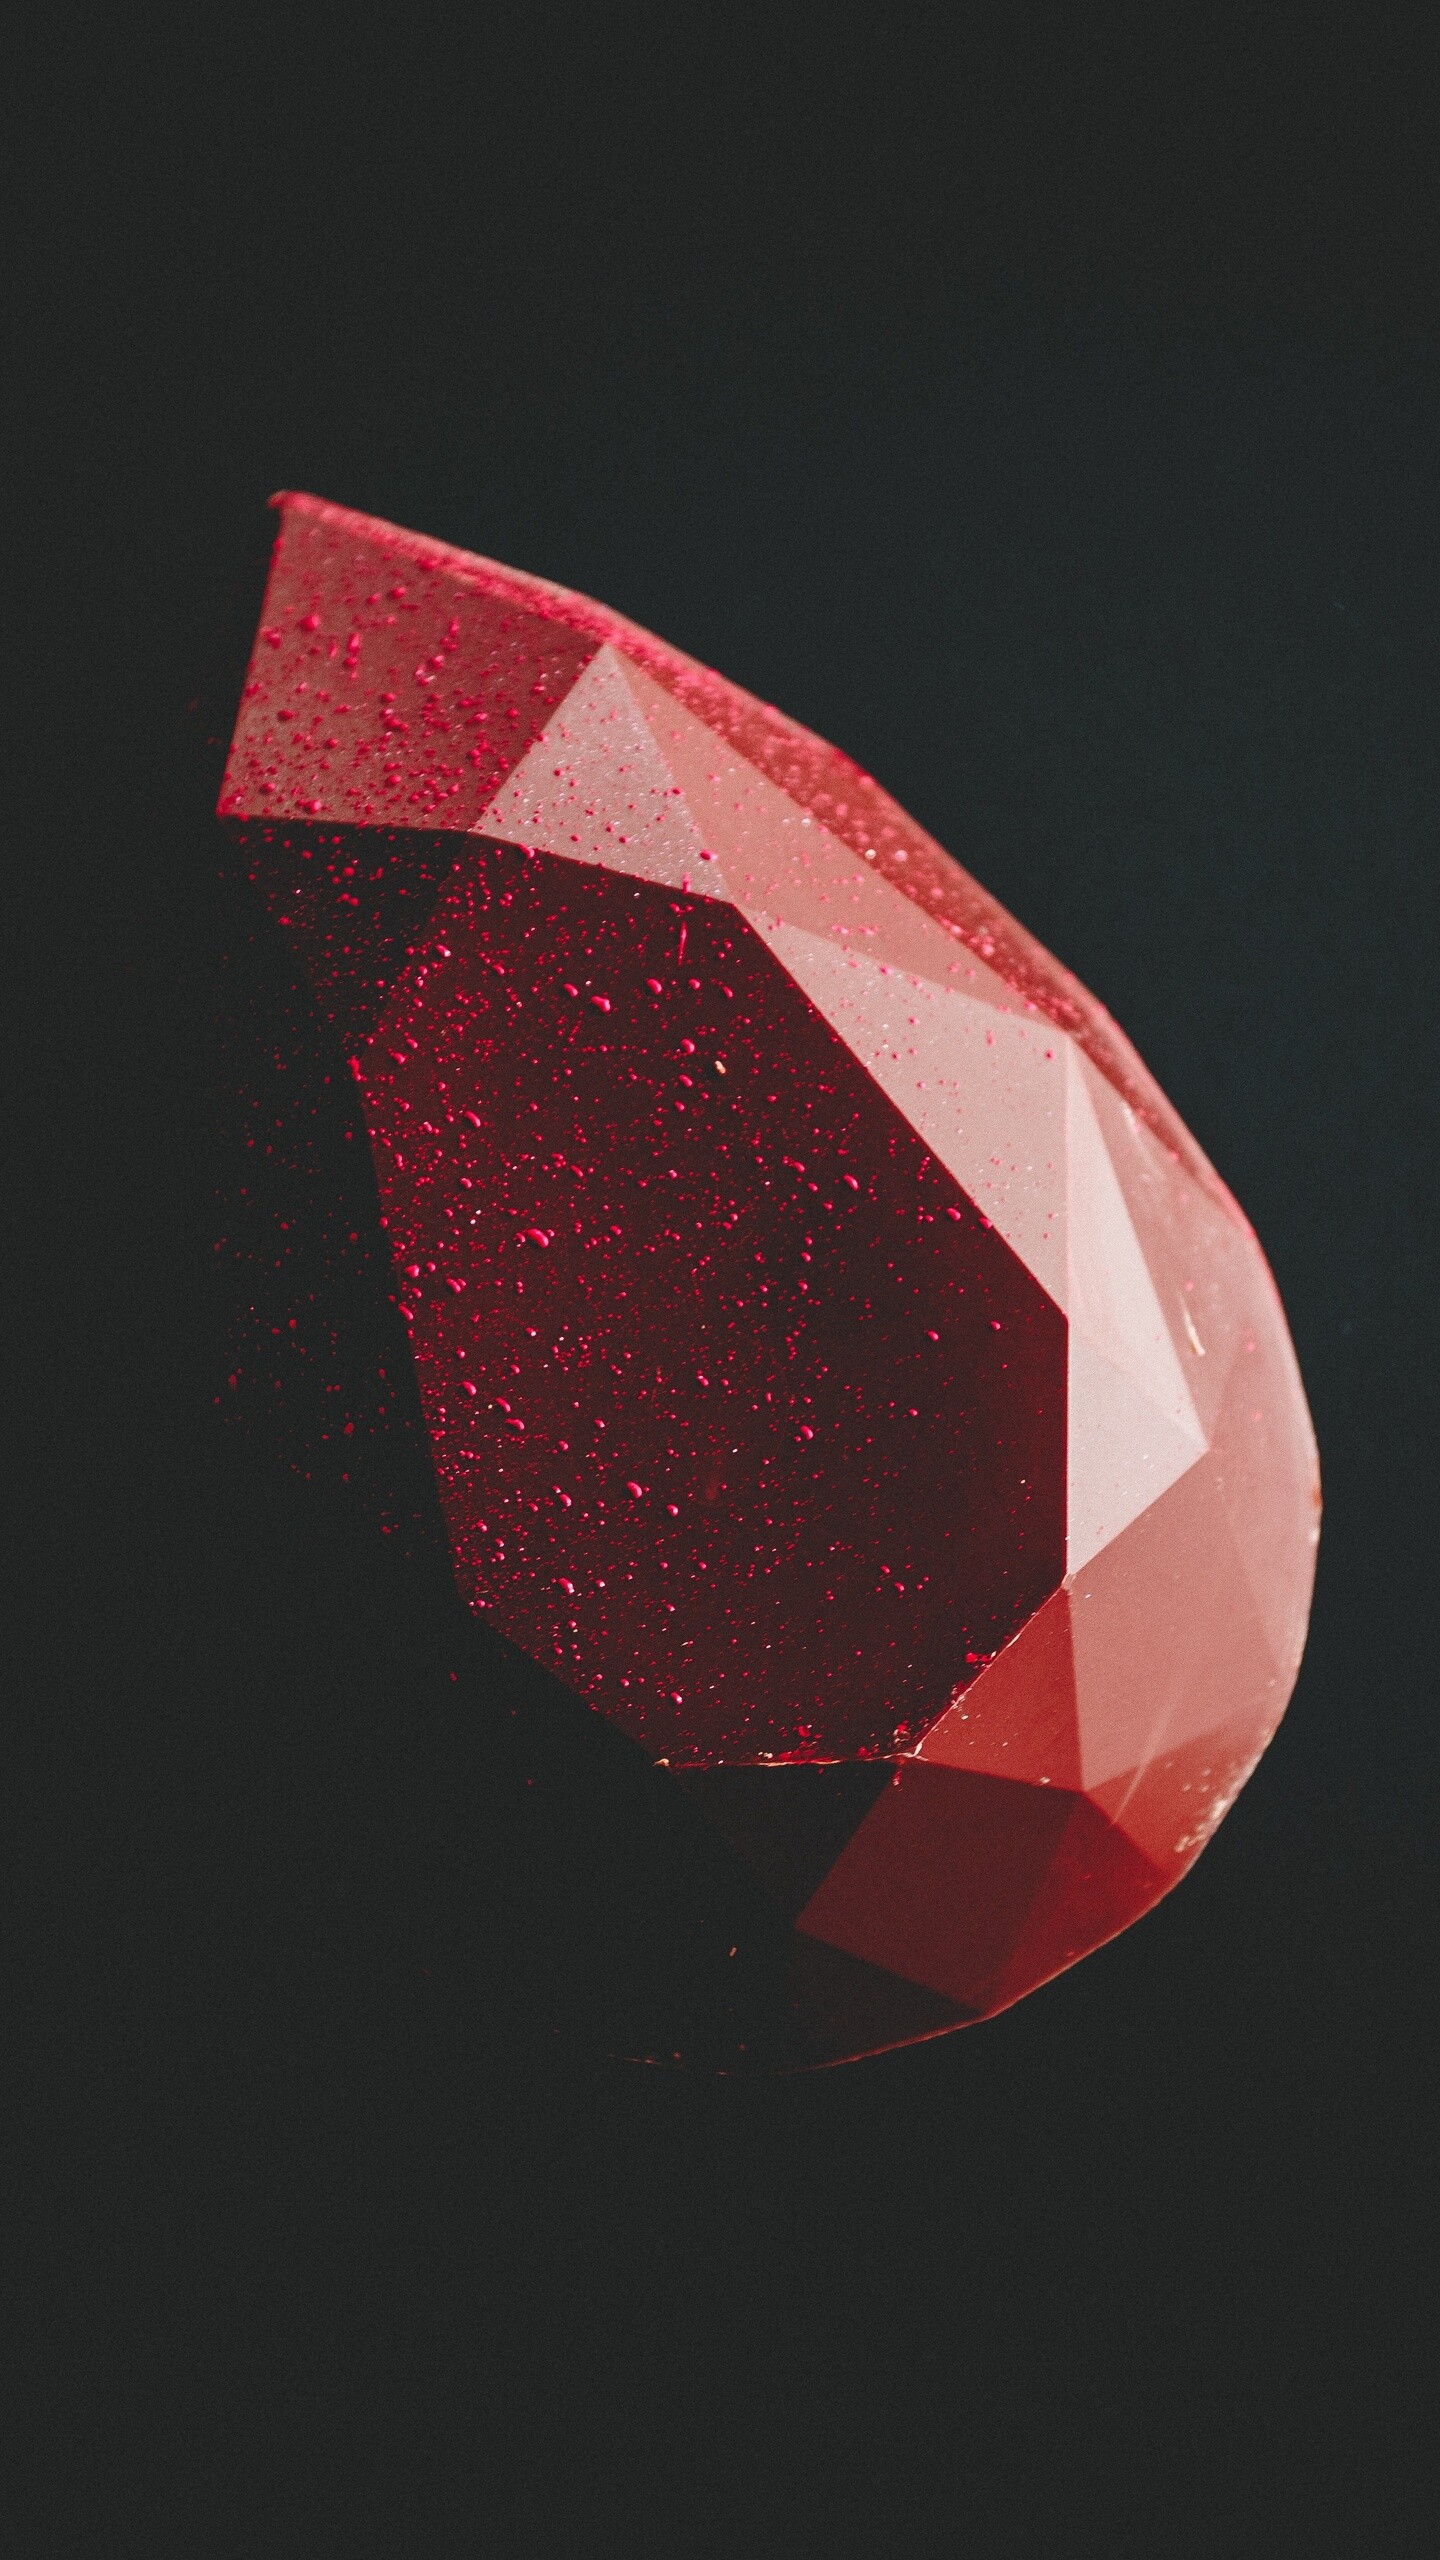 Gemstone: Red diamond, Minimal dark, Minerals that have been chosen for their beauty and durability. 1440x2560 HD Background.